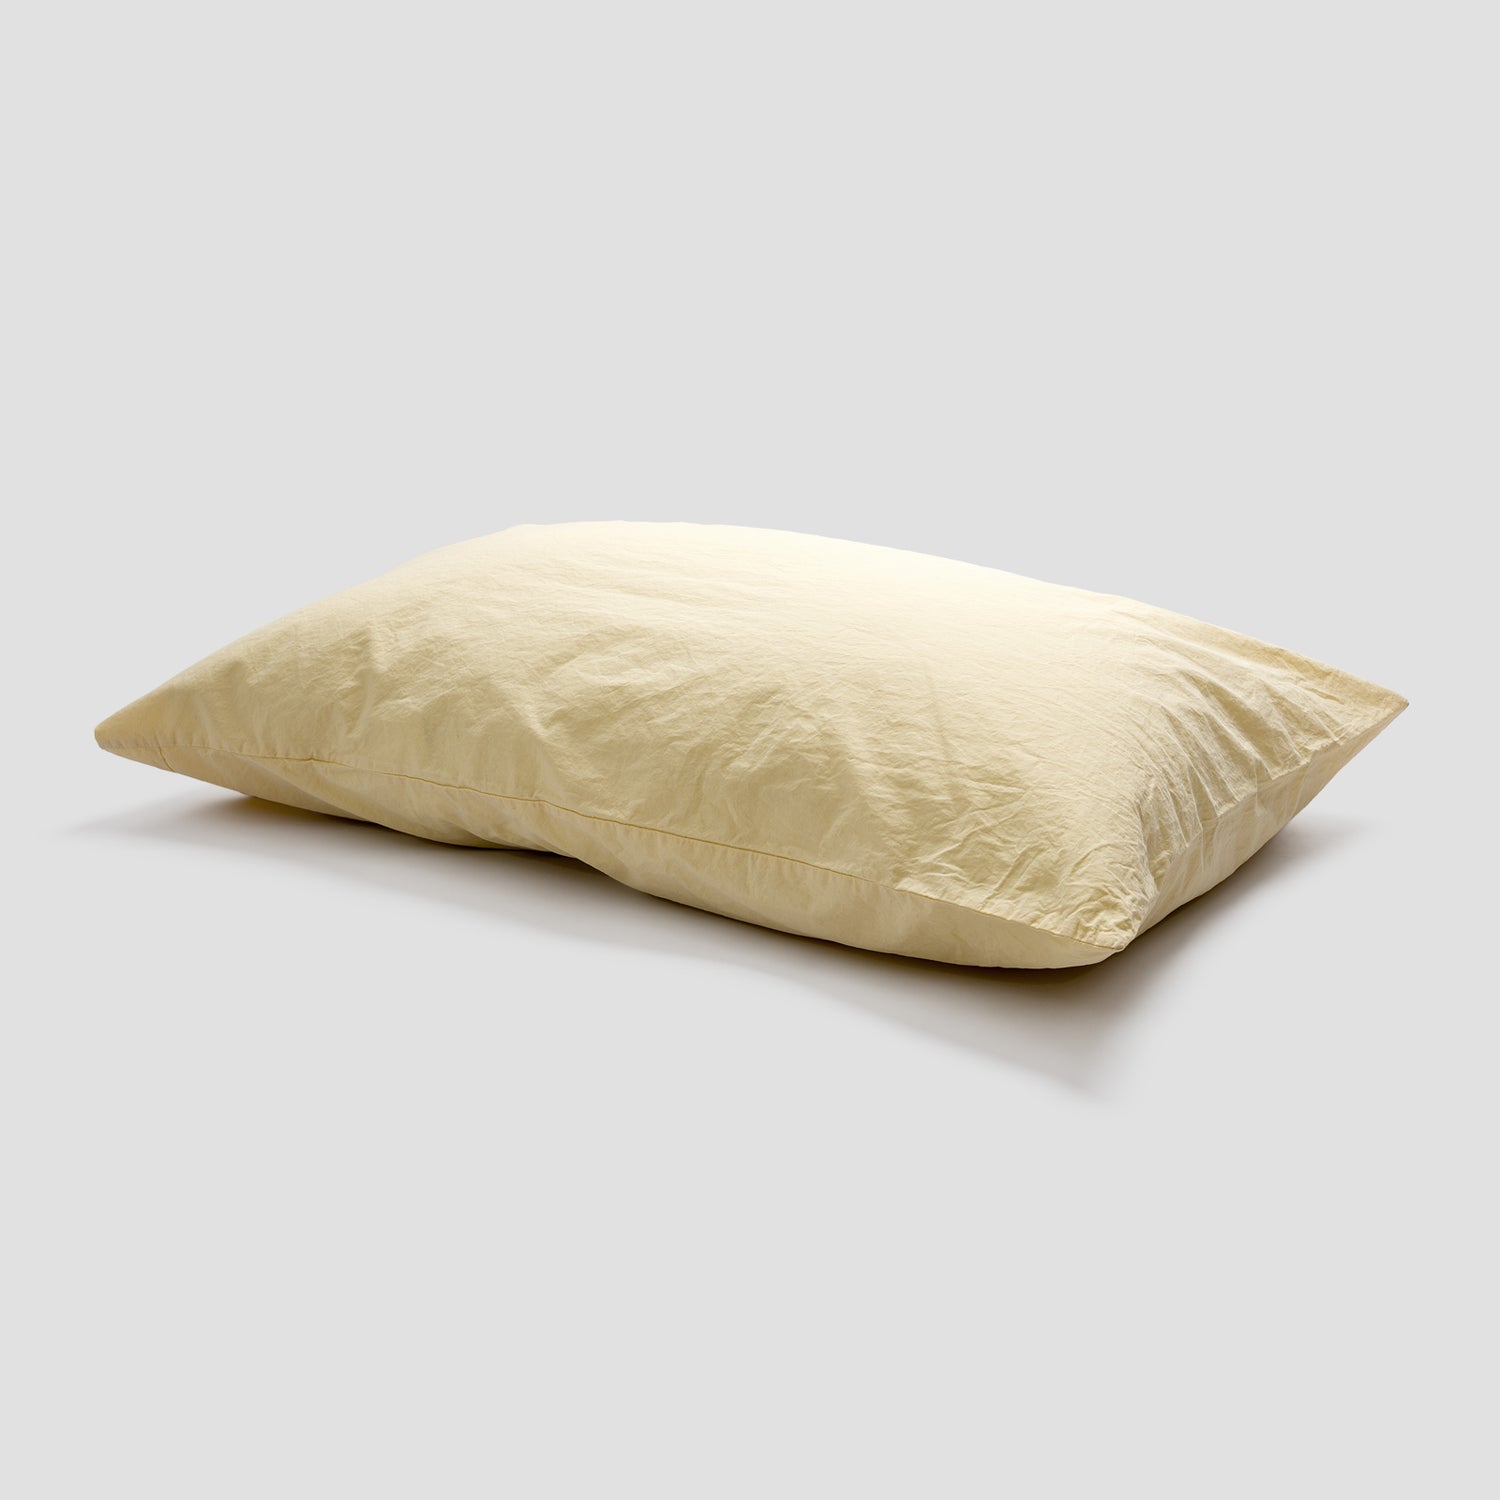 Buttermilk Washed Percale Cotton Bedding